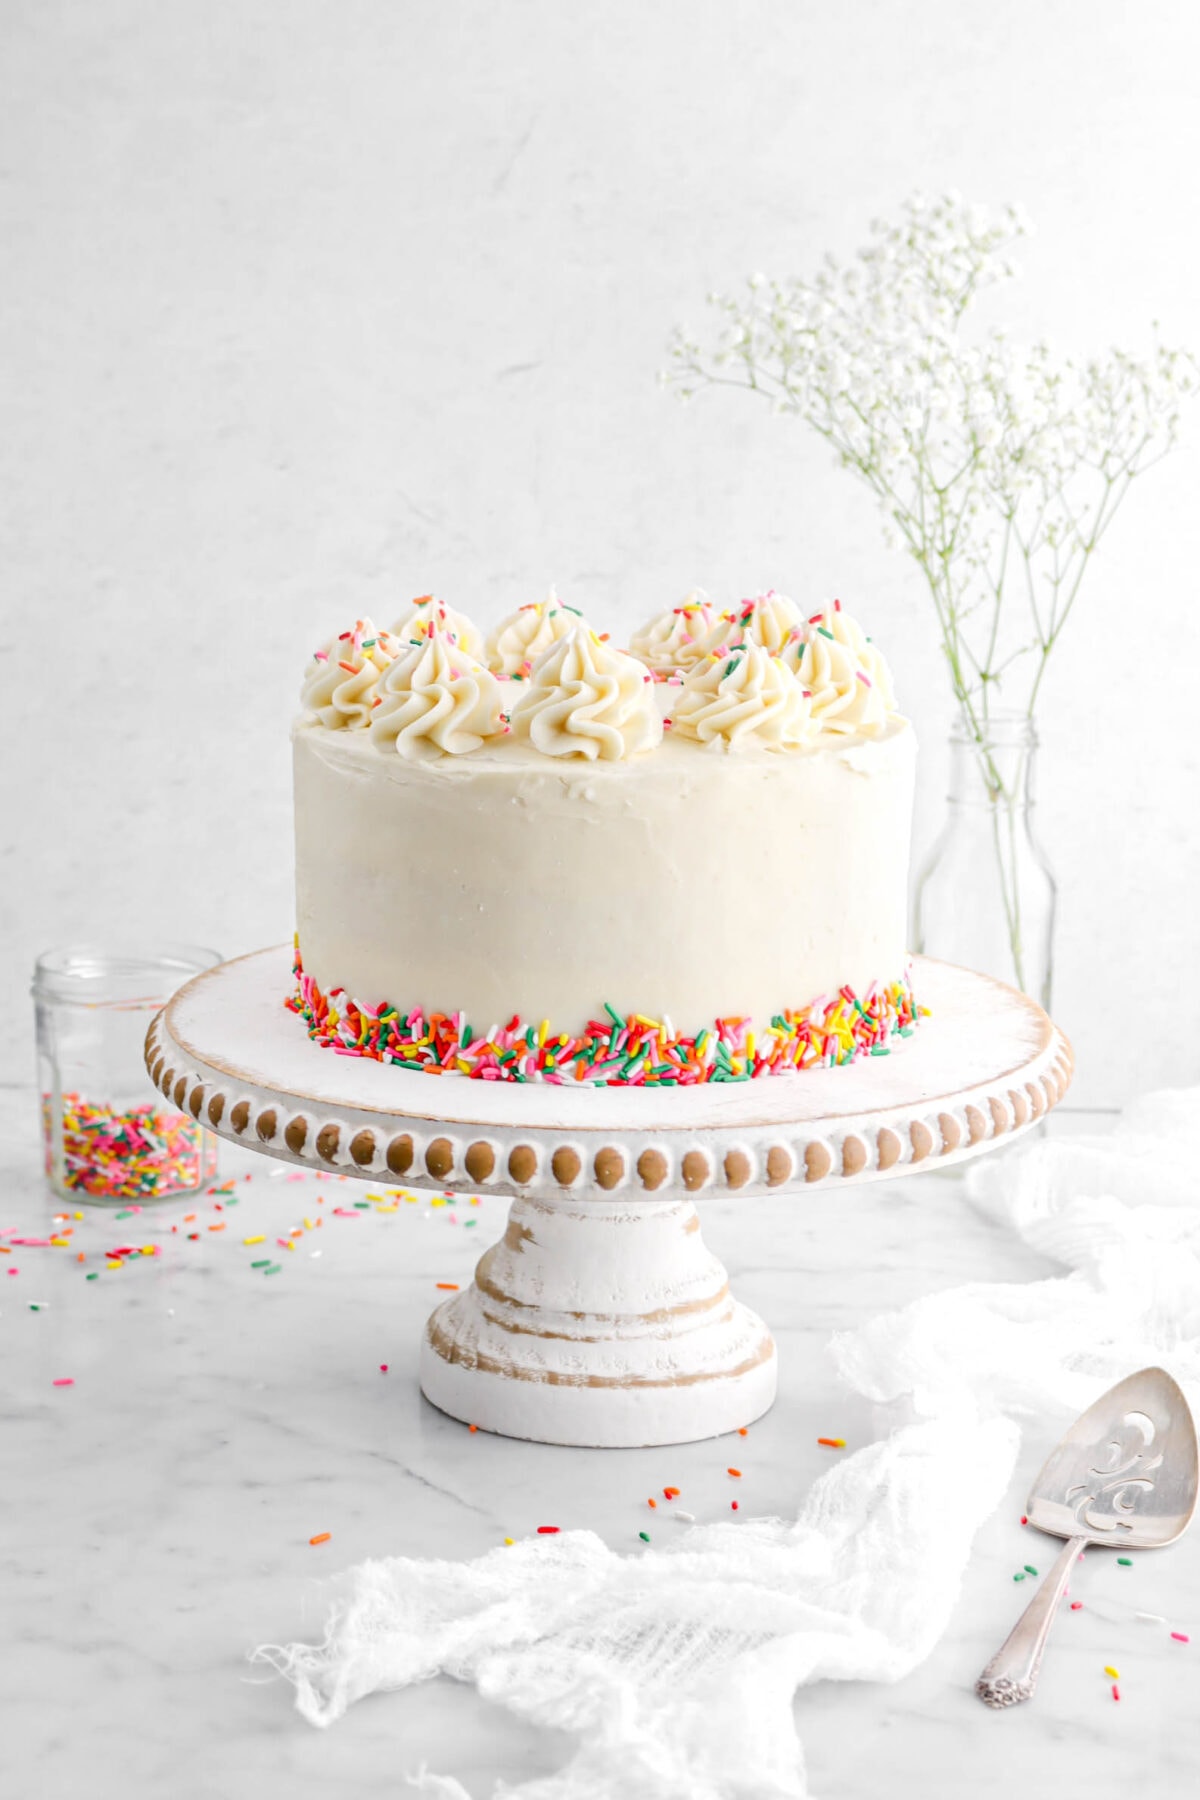 funfetti cake on white washed wood cake stand with frosting piped on the top and sprinkles on the bottom. A white cheesecloth with cake knife beside, jar of rainbow sprinkles and glass f white flowers behind.